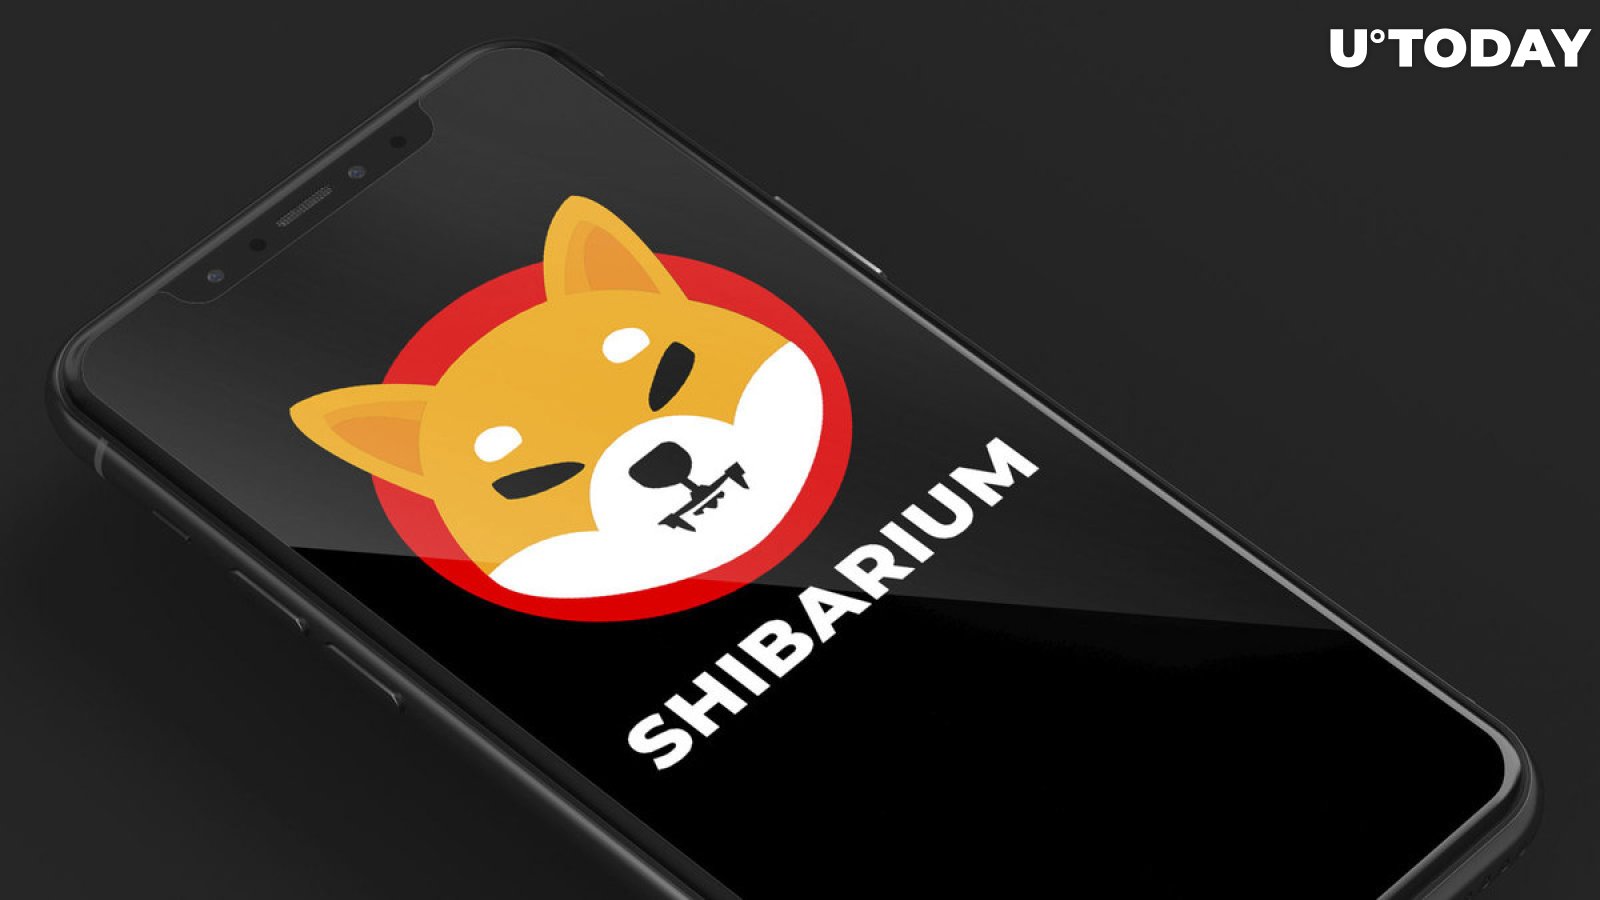 Shiba Inu's Shibarium Best Timing Hinted by Shiba Ecosystem Official